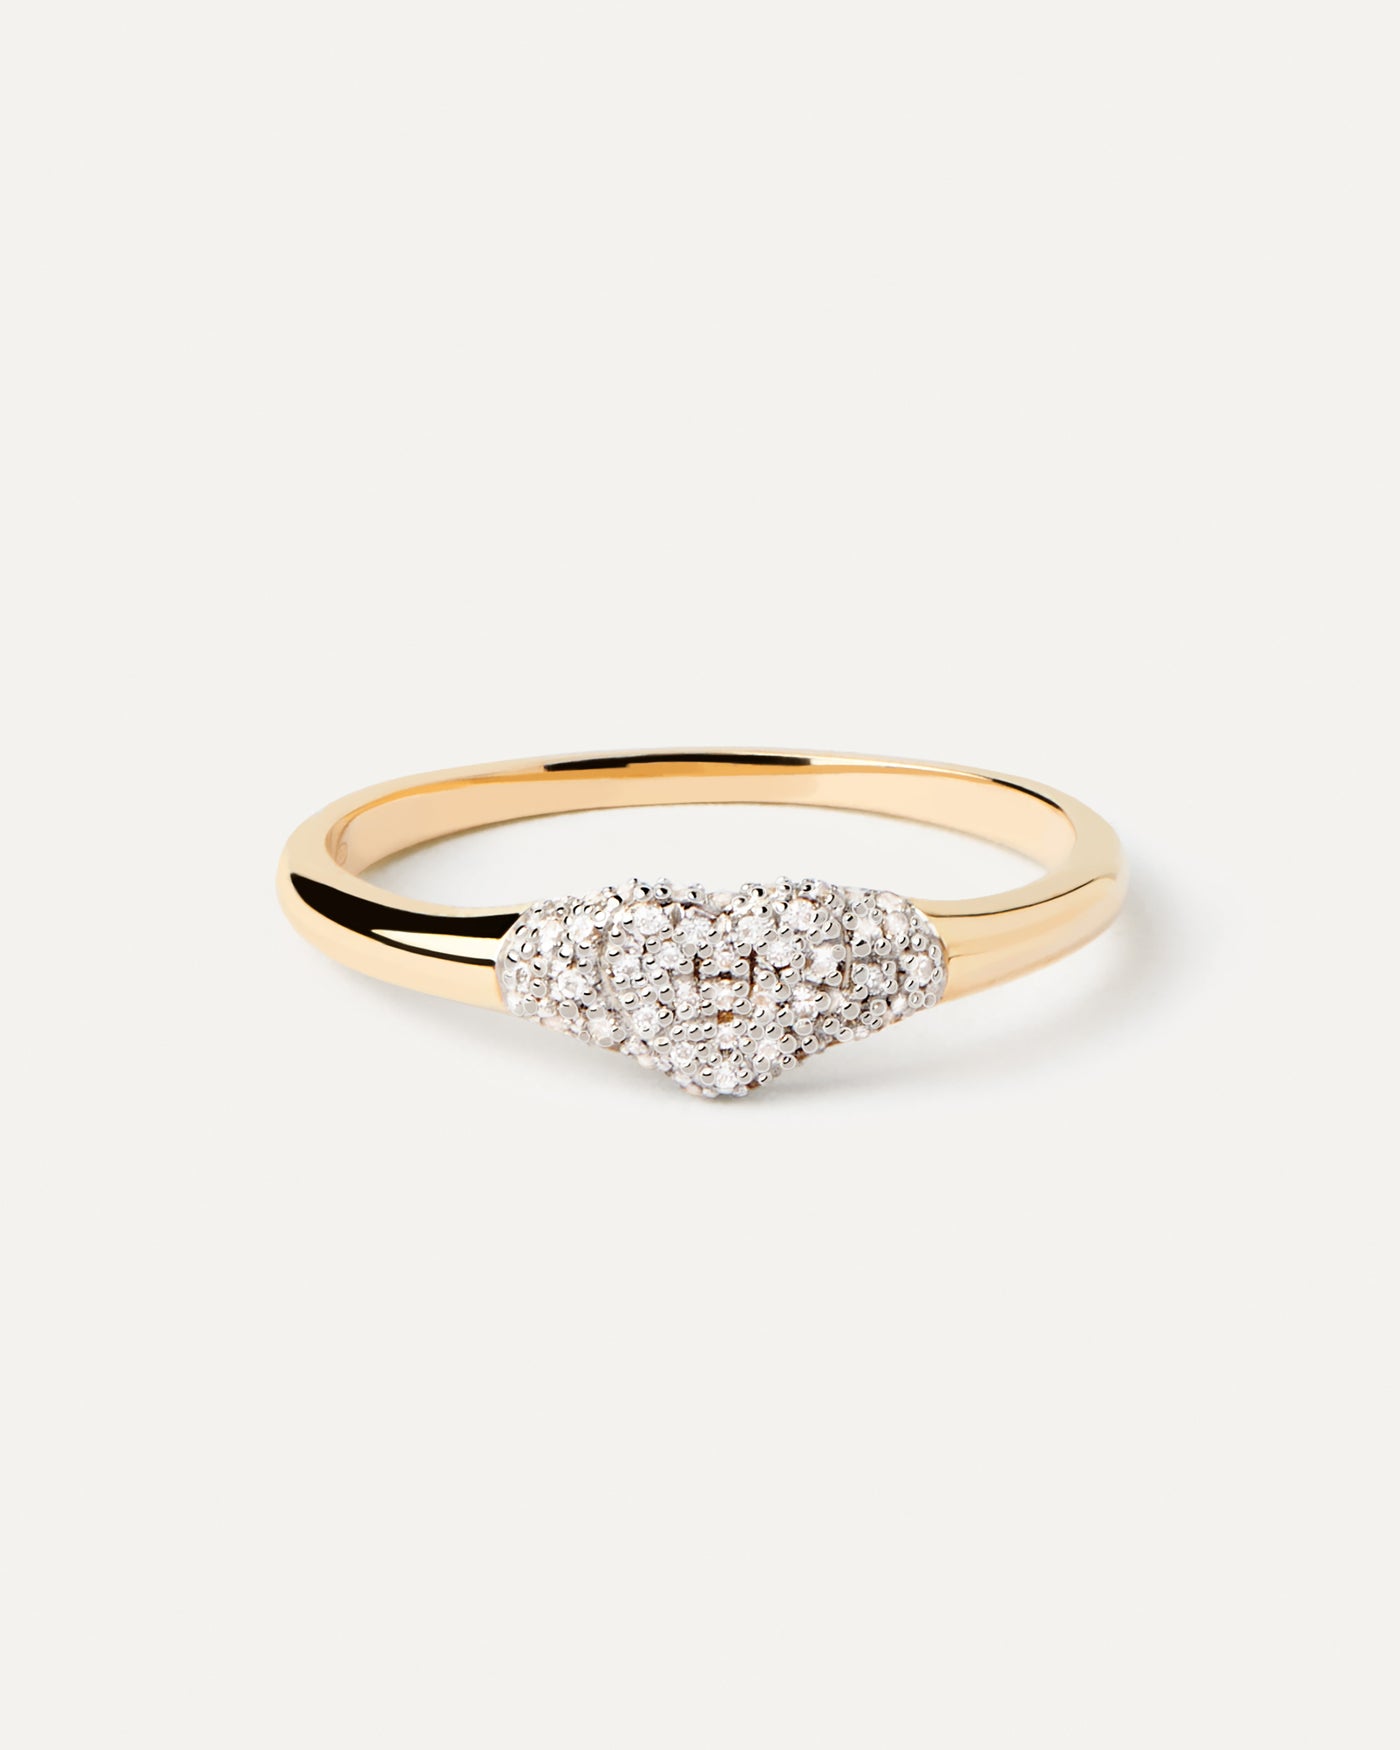 2023 Selection | Diamonds and Gold Super Heart Stamp Ring. Heart-shaped signet ring in solid yellow gold with 48 pavé diamonds stamp of 0.62 carats. Get the latest arrival from PDPAOLA. Place your order safely and get this Best Seller. Free Shipping.